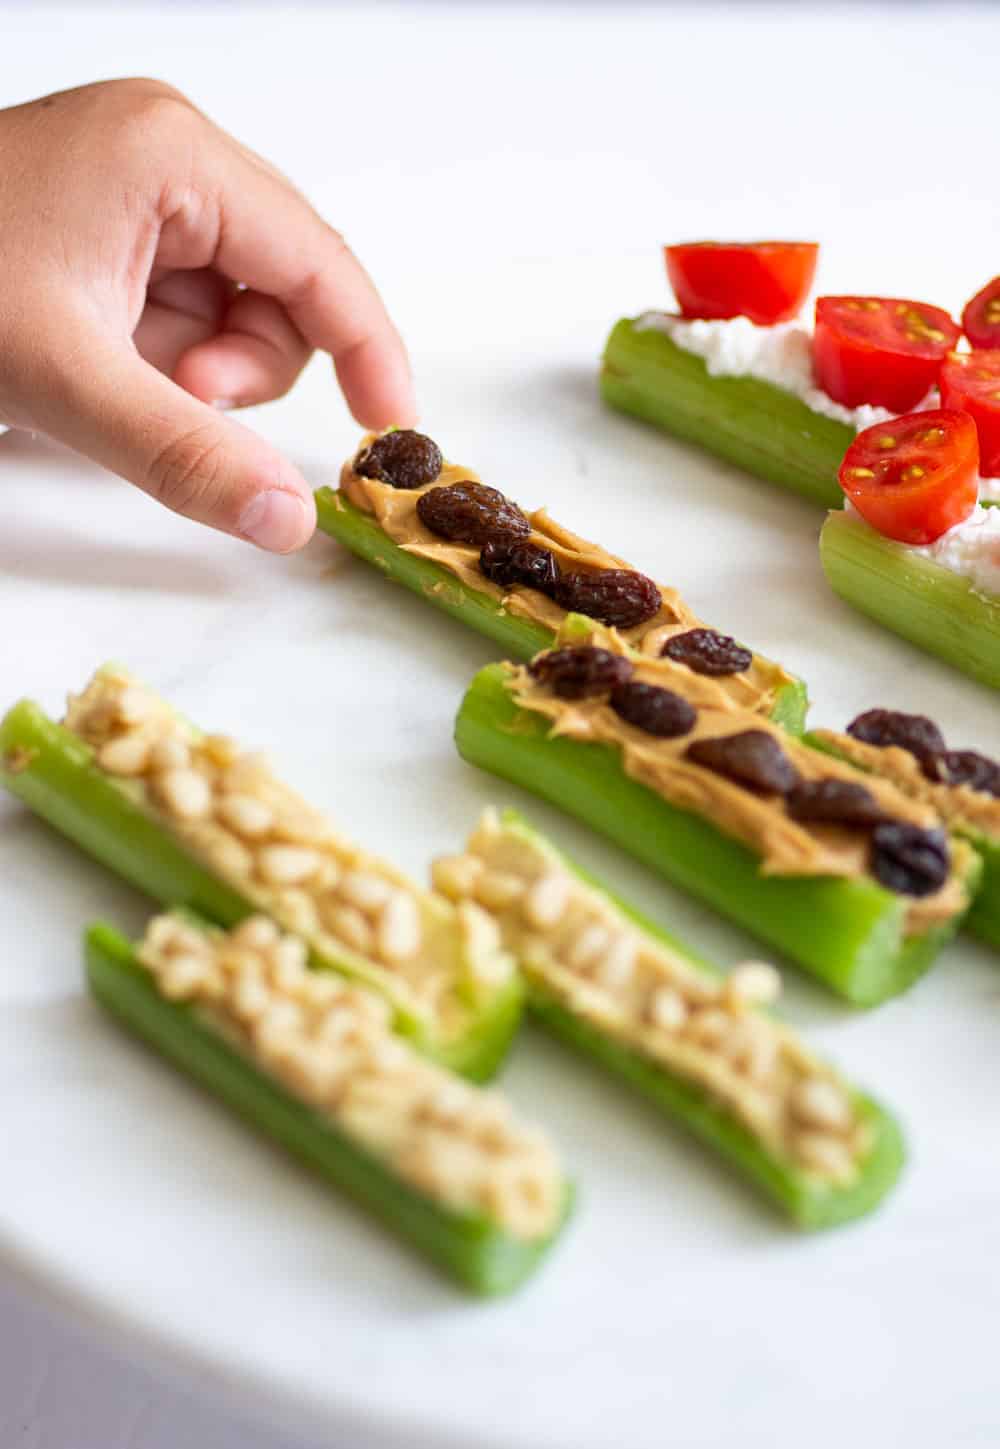 Pull back image of small hand grabbing celery with peanut butter and raisins